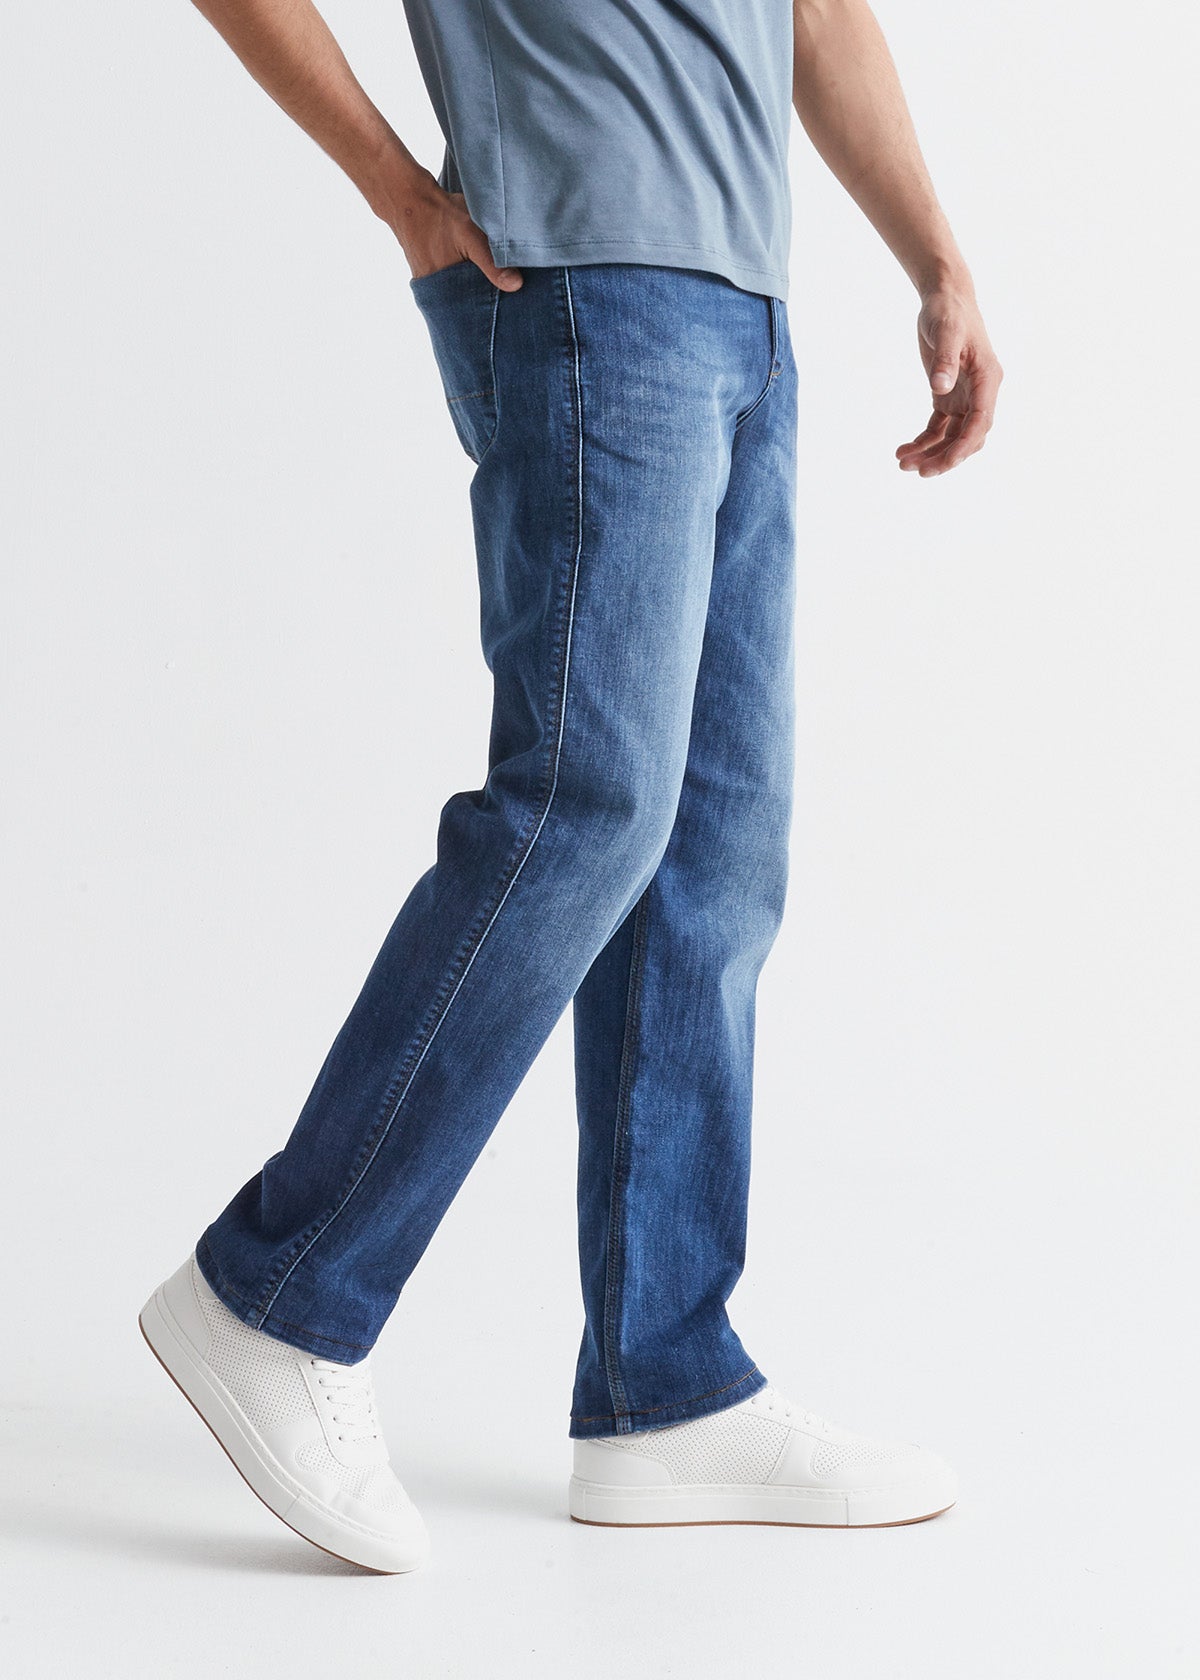 Men's Athletic Straight Jeans